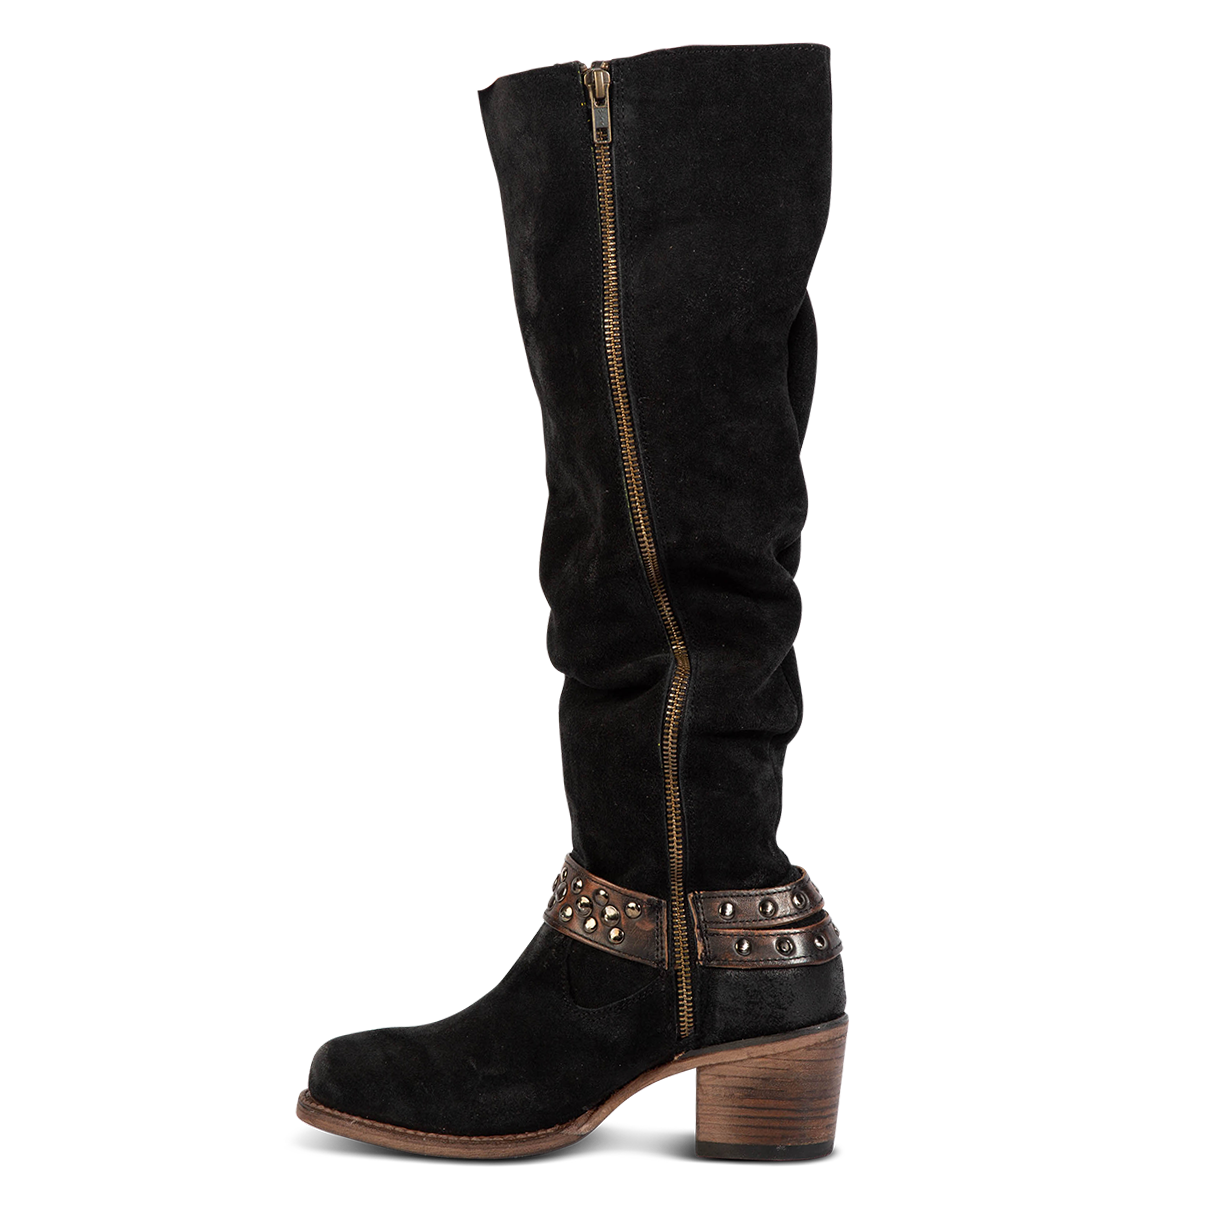 Inside view showing working full brass zip closure and studded ankle harness on FREEBIRD womens Daisy black boot